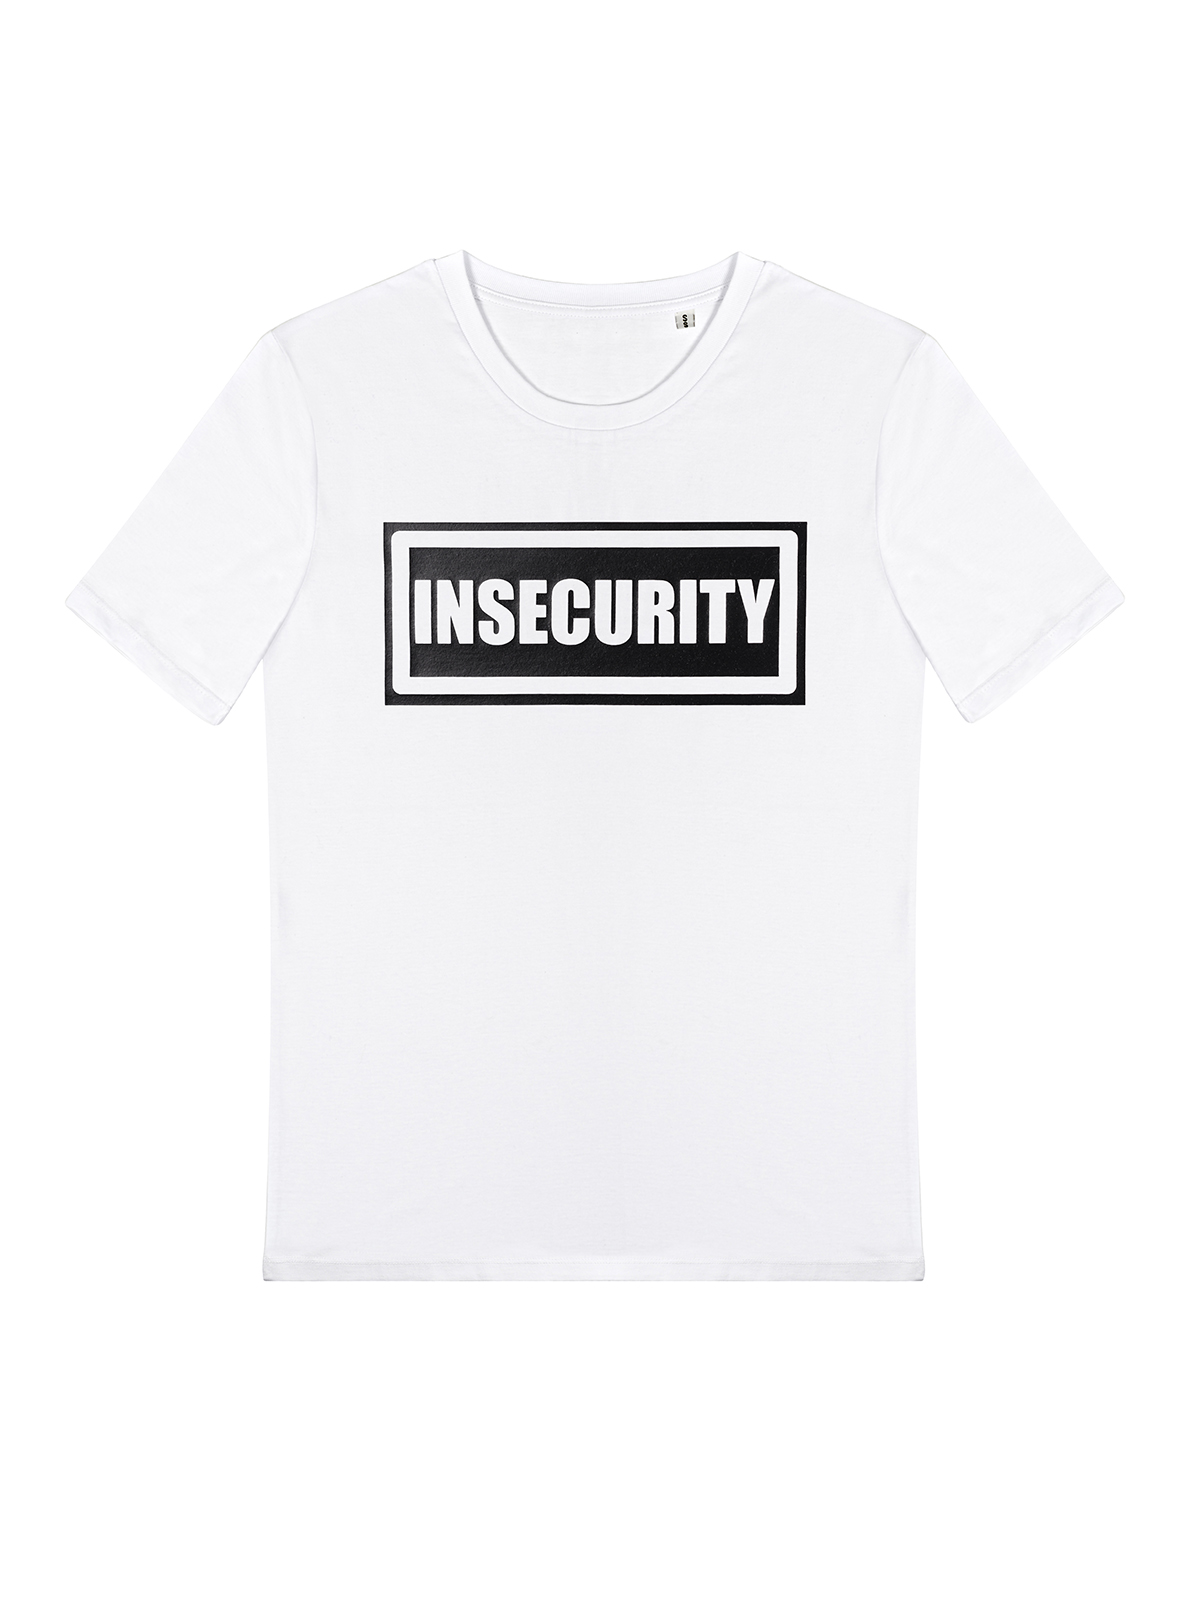 INSECURITY T-SHIRT